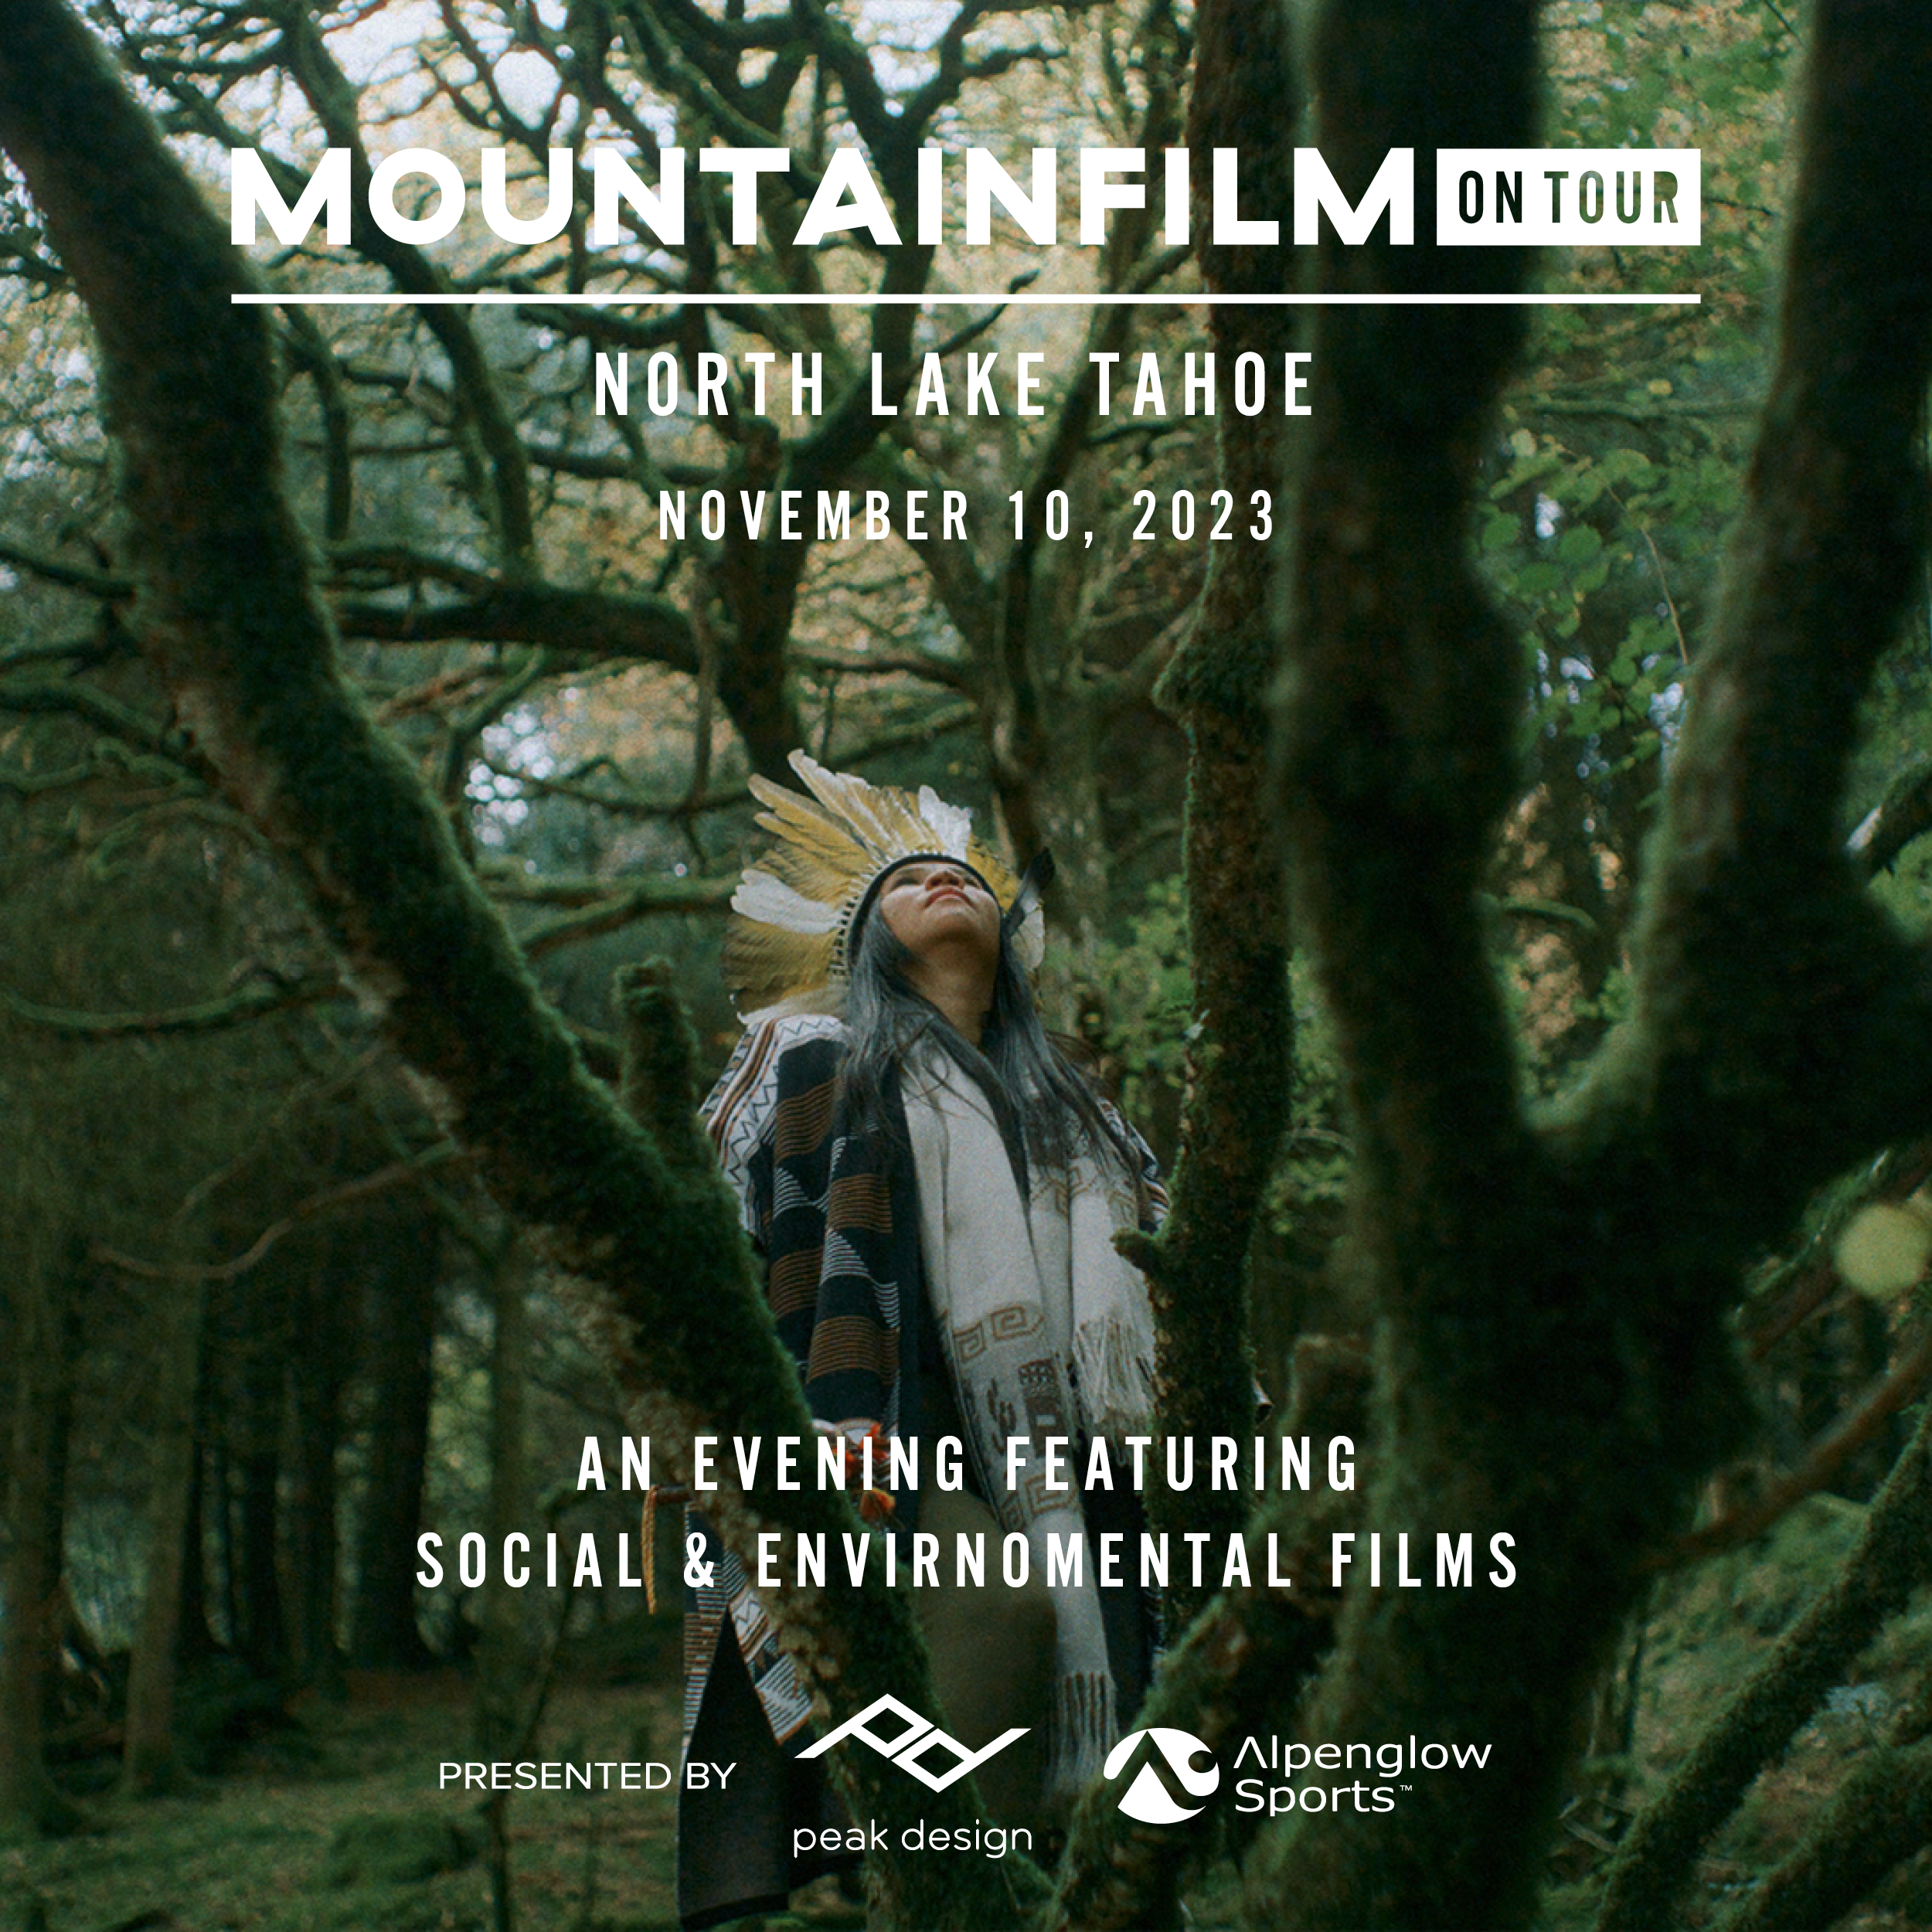 Mountainfilm On Tour Night 1: Social and Environmental Films